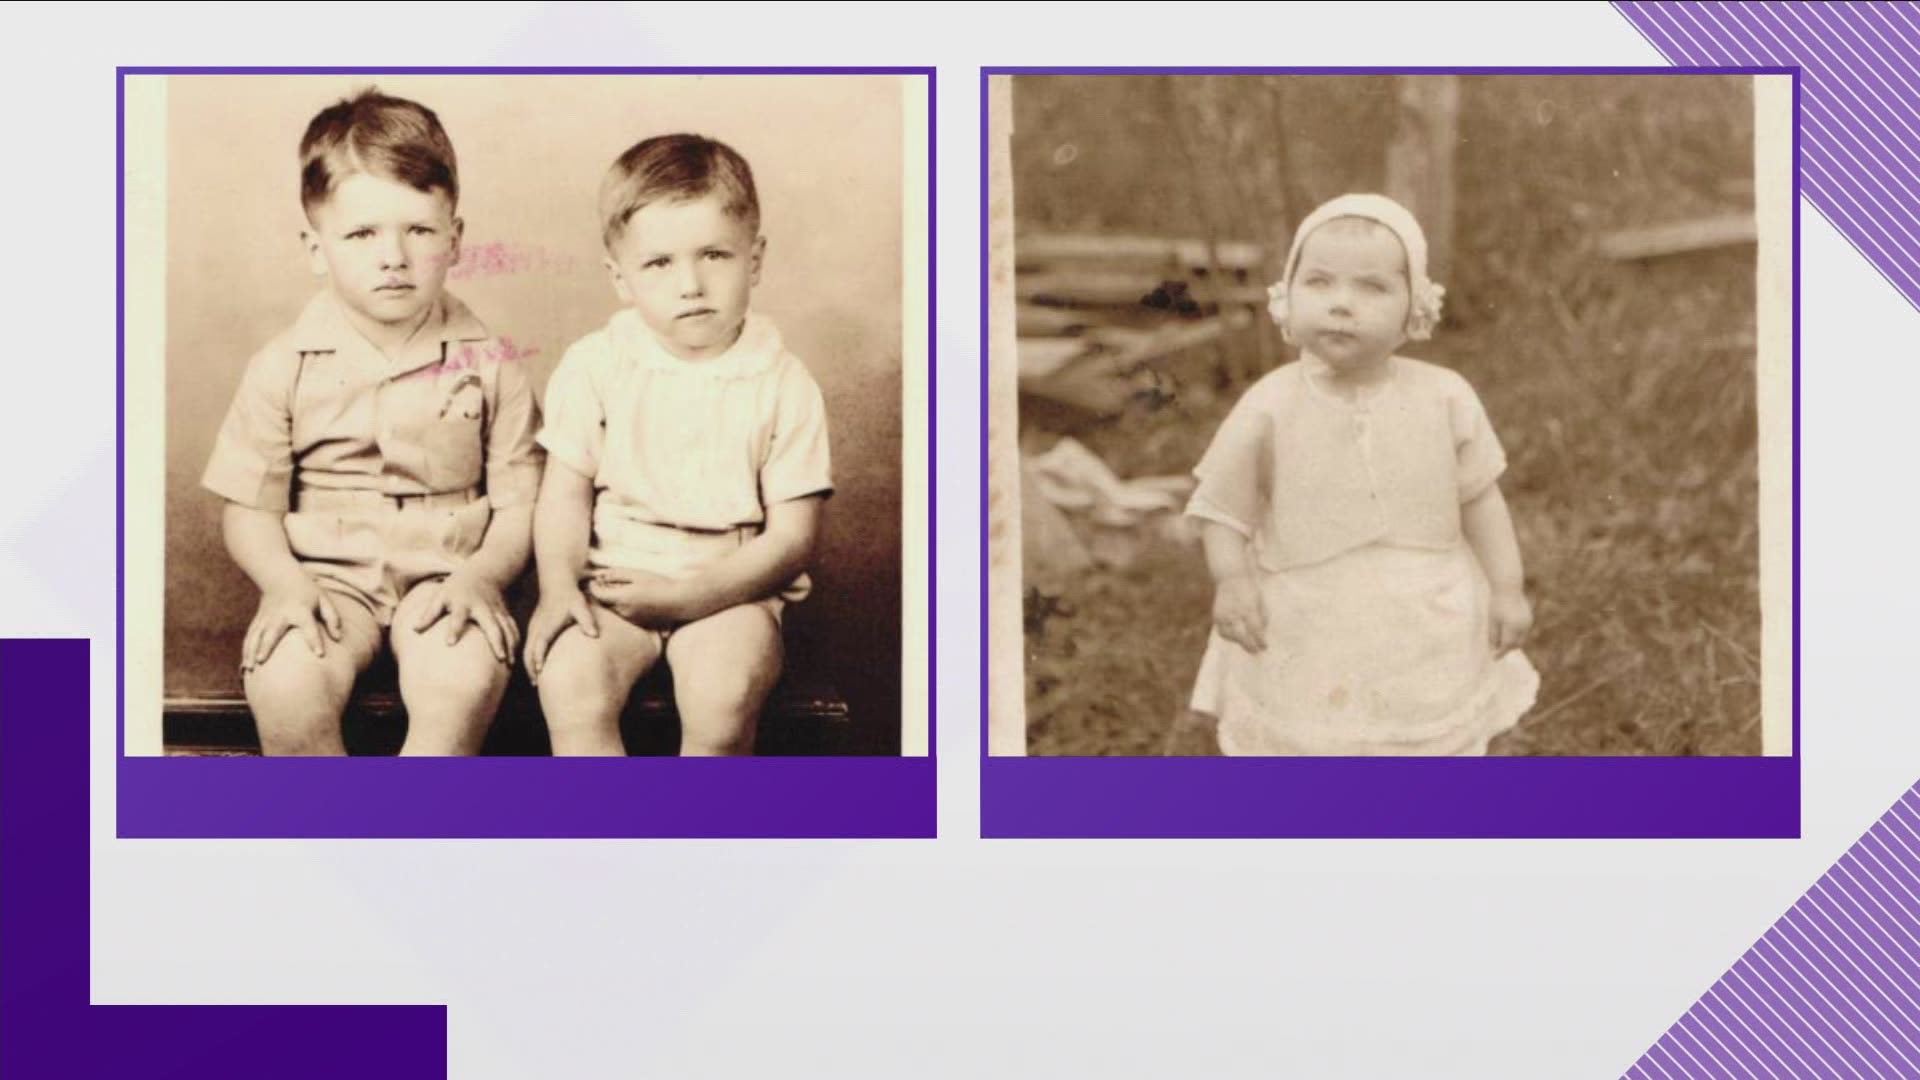 The Pigeon Forge Police Department needs help finding the family of the owners of some old photos.